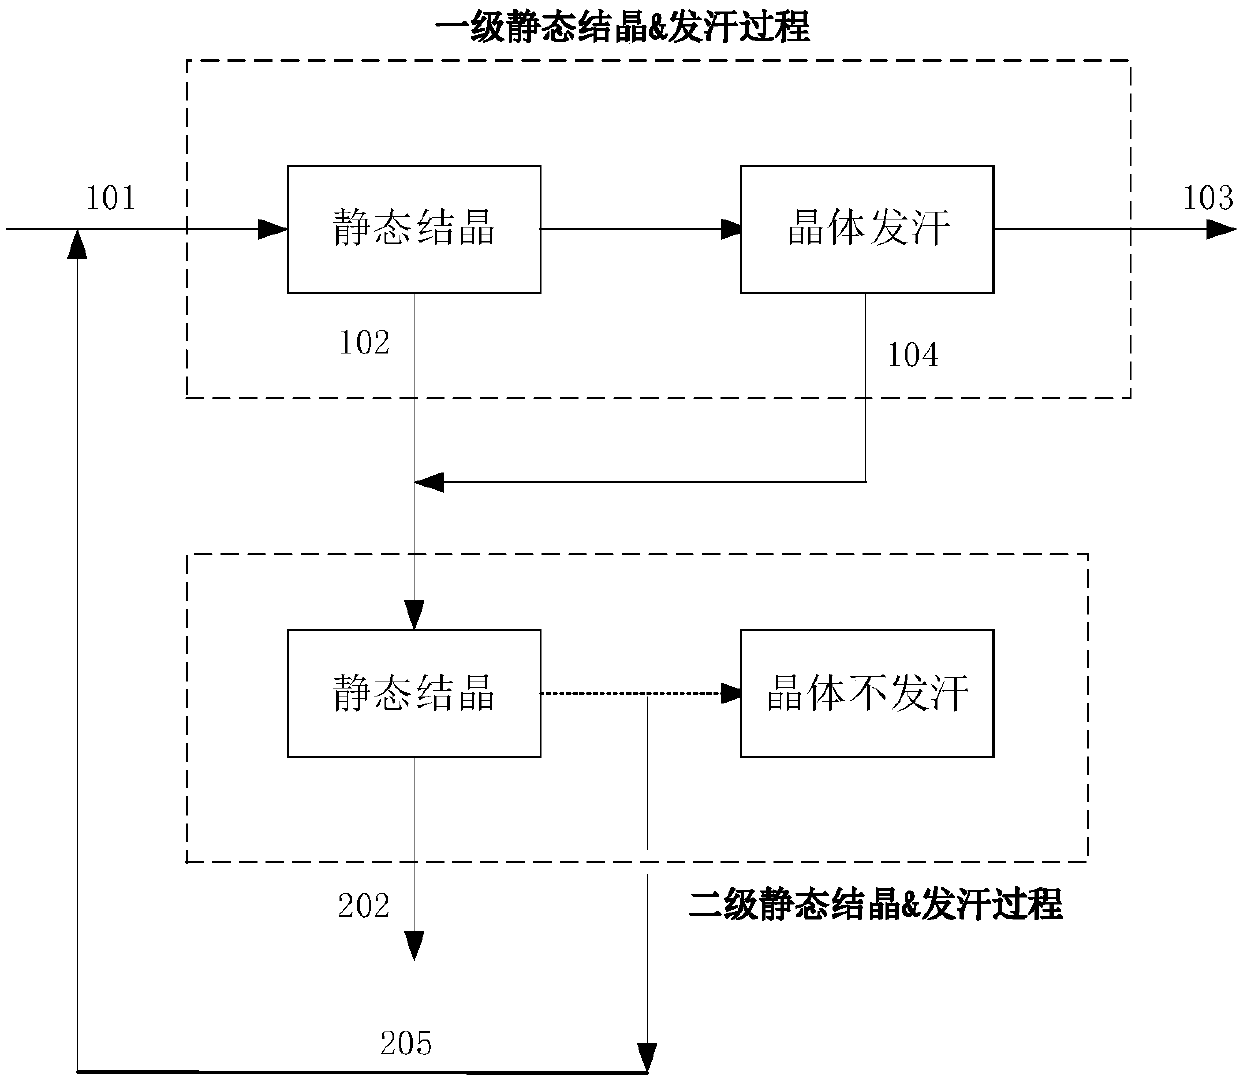 Crystallization and purification process of high-purity ethylene carbonate